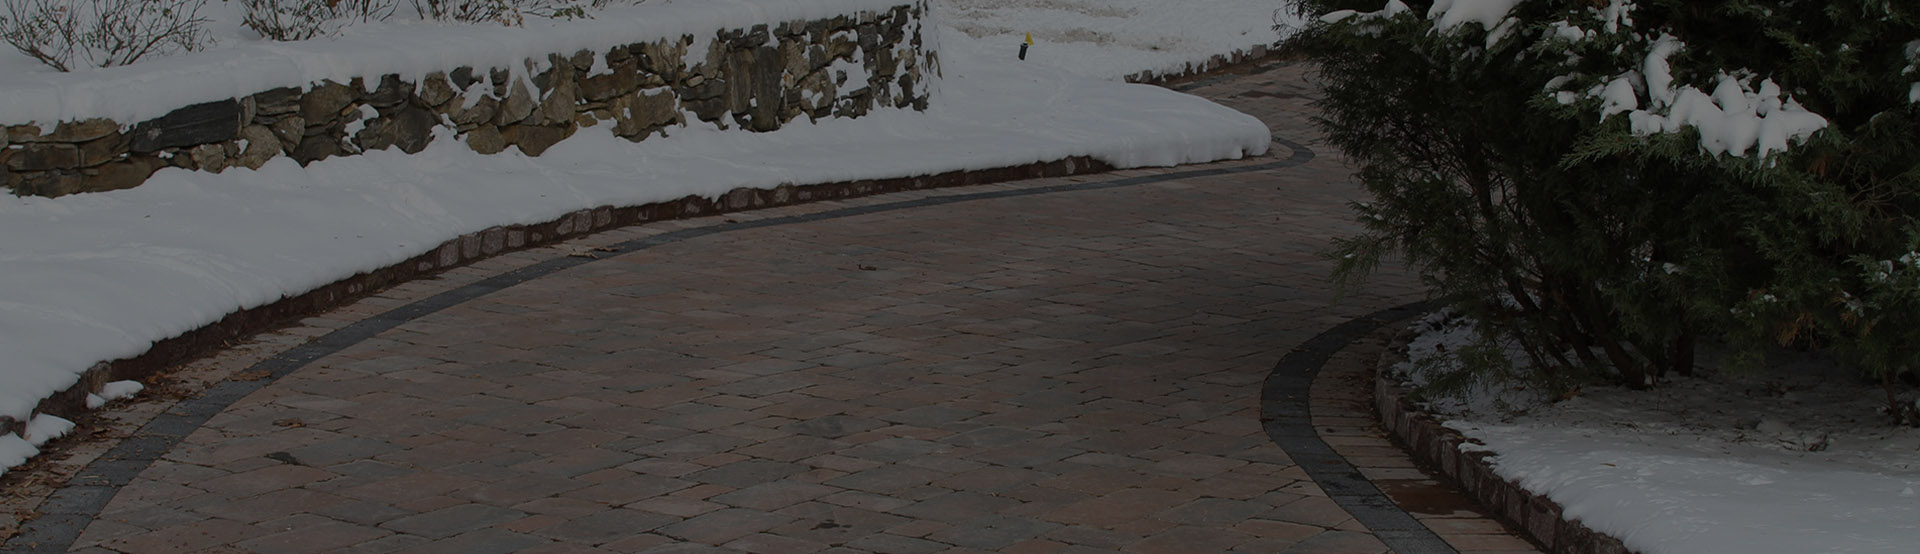 Heated paver driveway banner